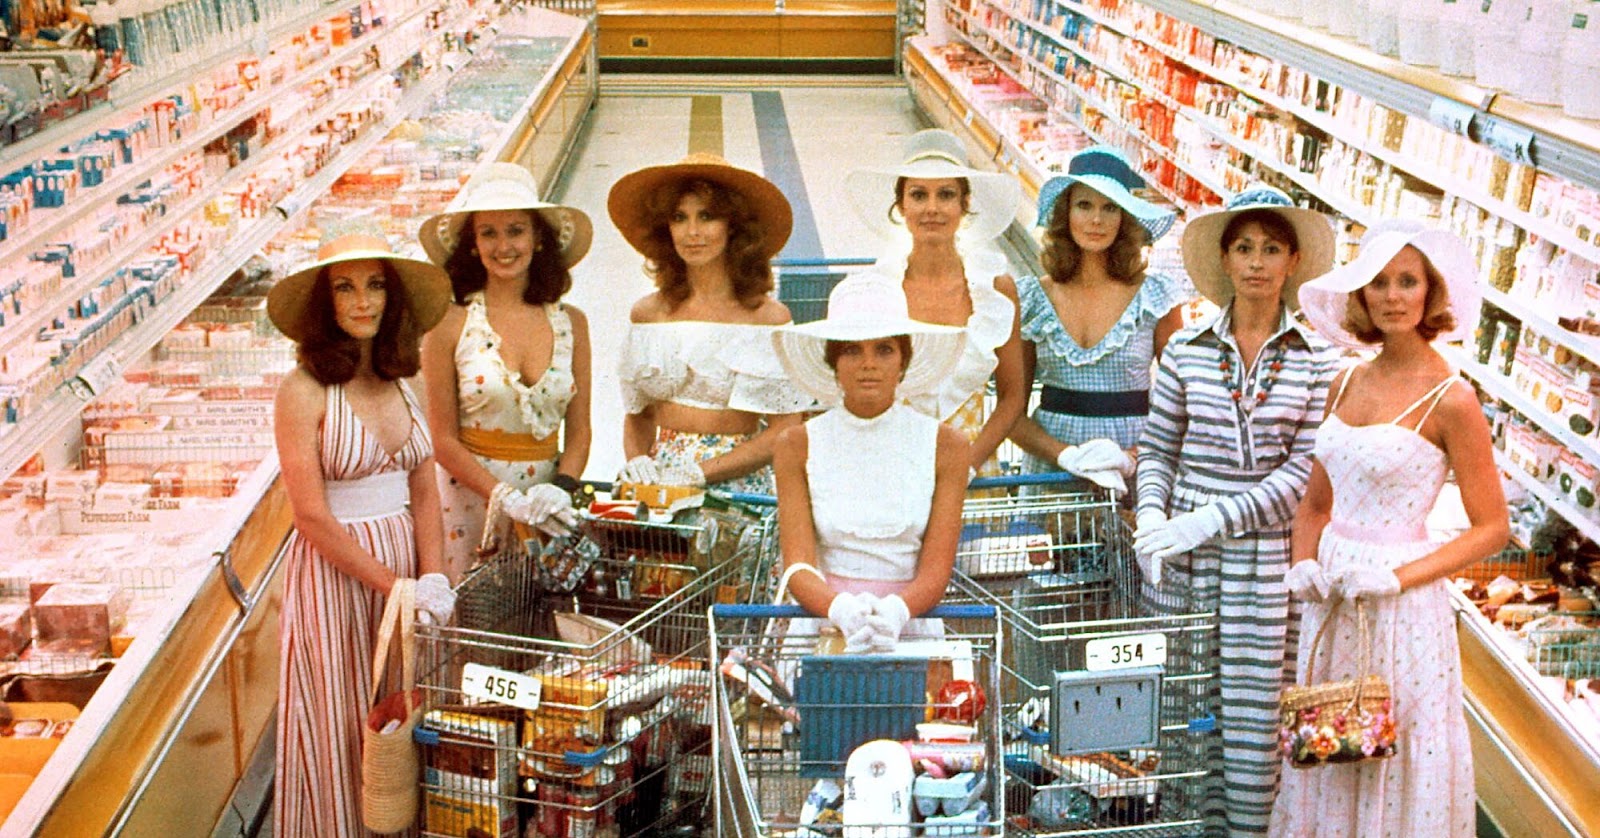 A still from The Stepford Wives. Eight fembots, all dressed like perfect housewives, stand in a grocery store.